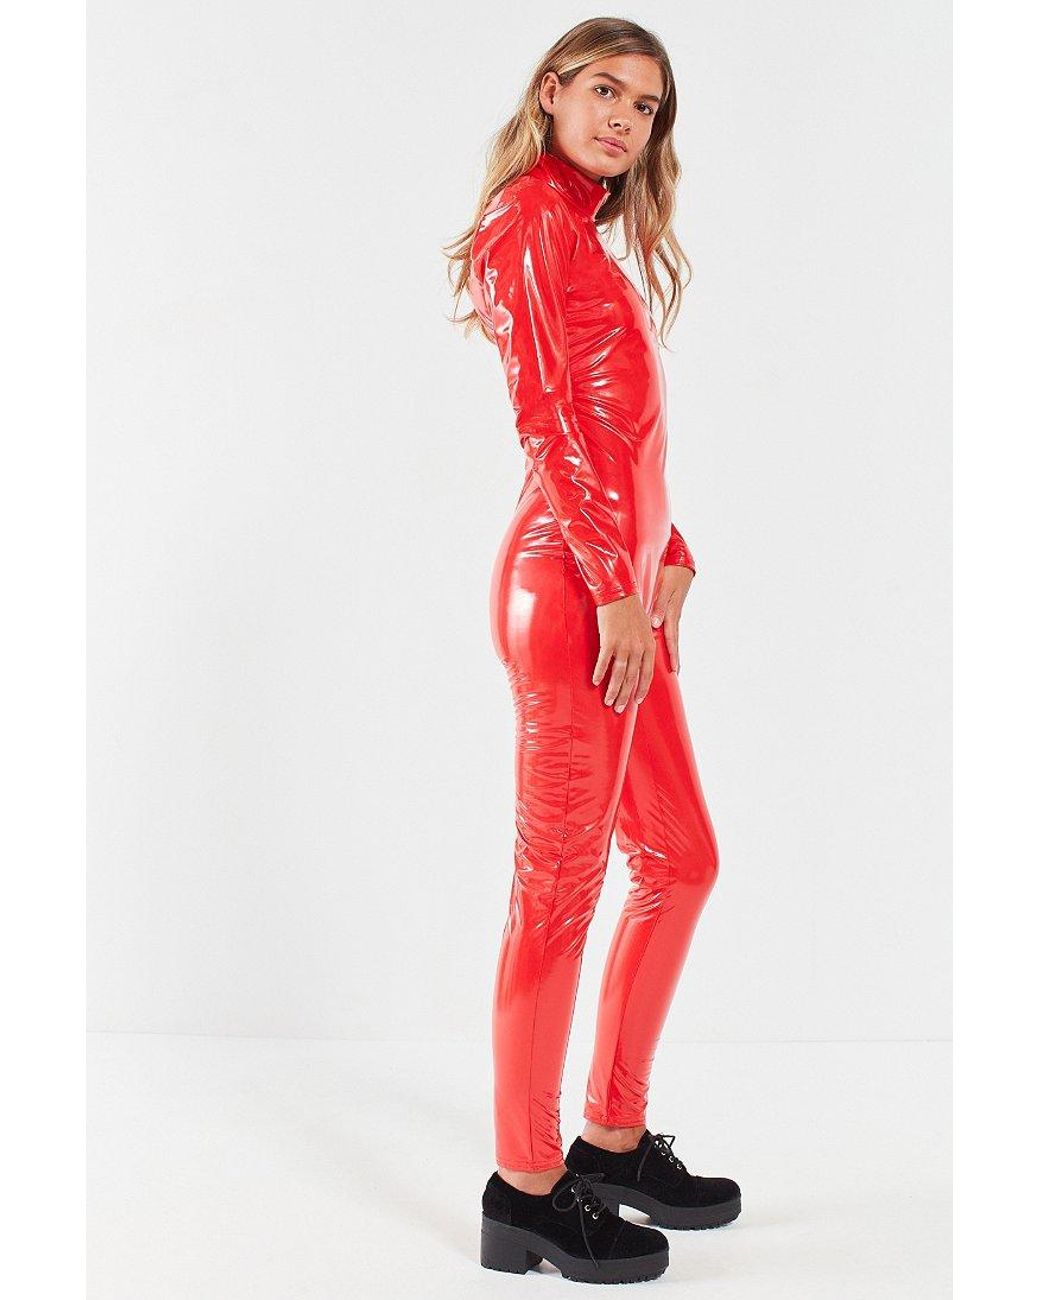 Buy Britney Inspired Red Stretch Vinyl PU Catsuit Oops I Did It Again  Turtle Neck Faux Leather Jumpsuit Halloween Costume XS S M L XL Xxl Online  in India - Etsy